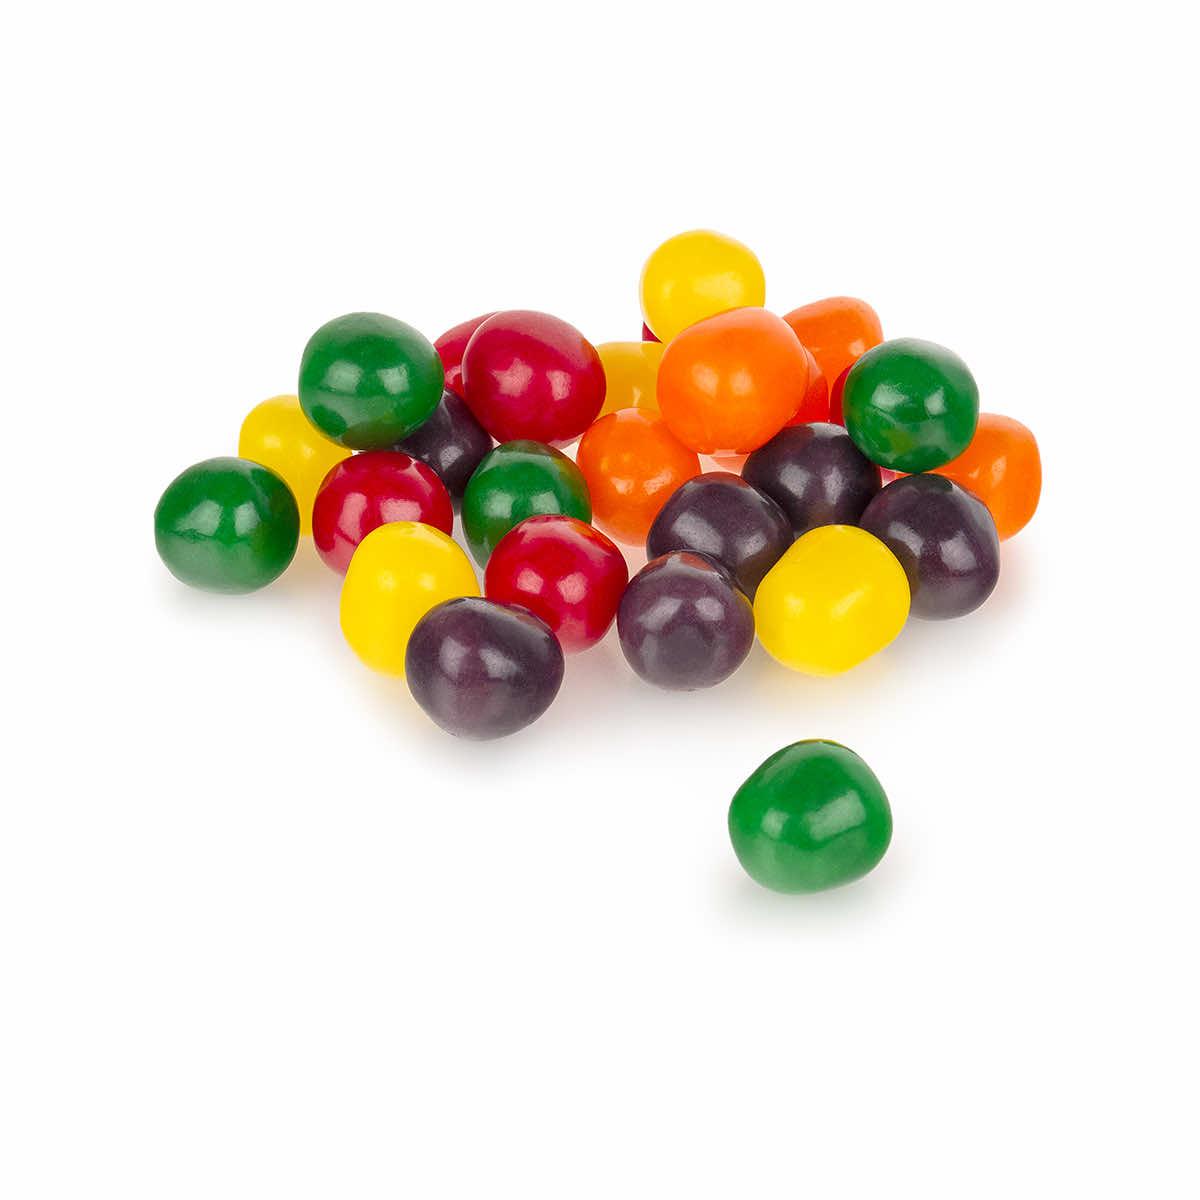 Charms are a favorite old timey retro candy. These hard candies come in  assorted flavors including cherry, grape, le…